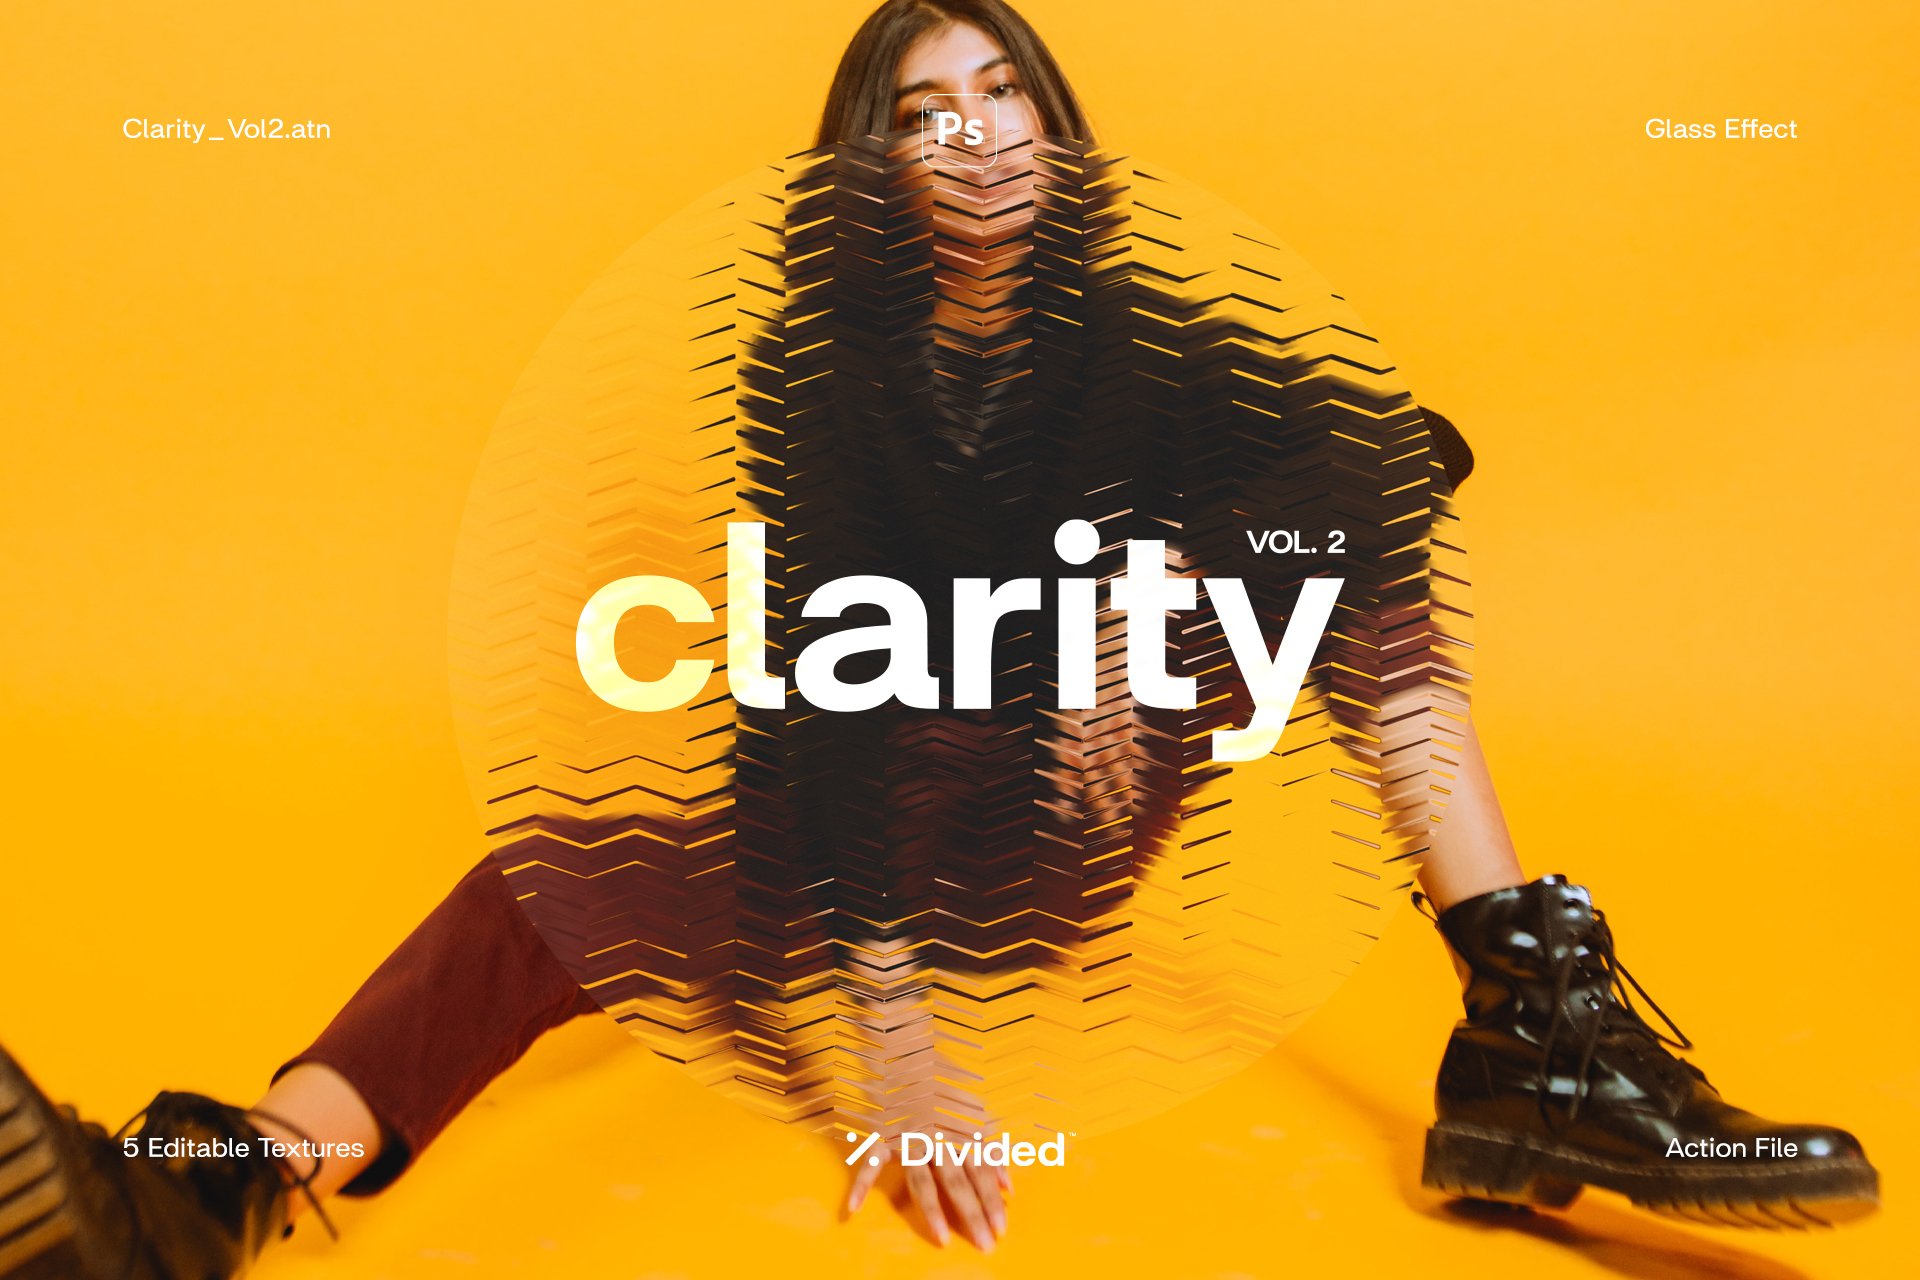 Clarity Vol. 2 Glass Photo Effectcover image.